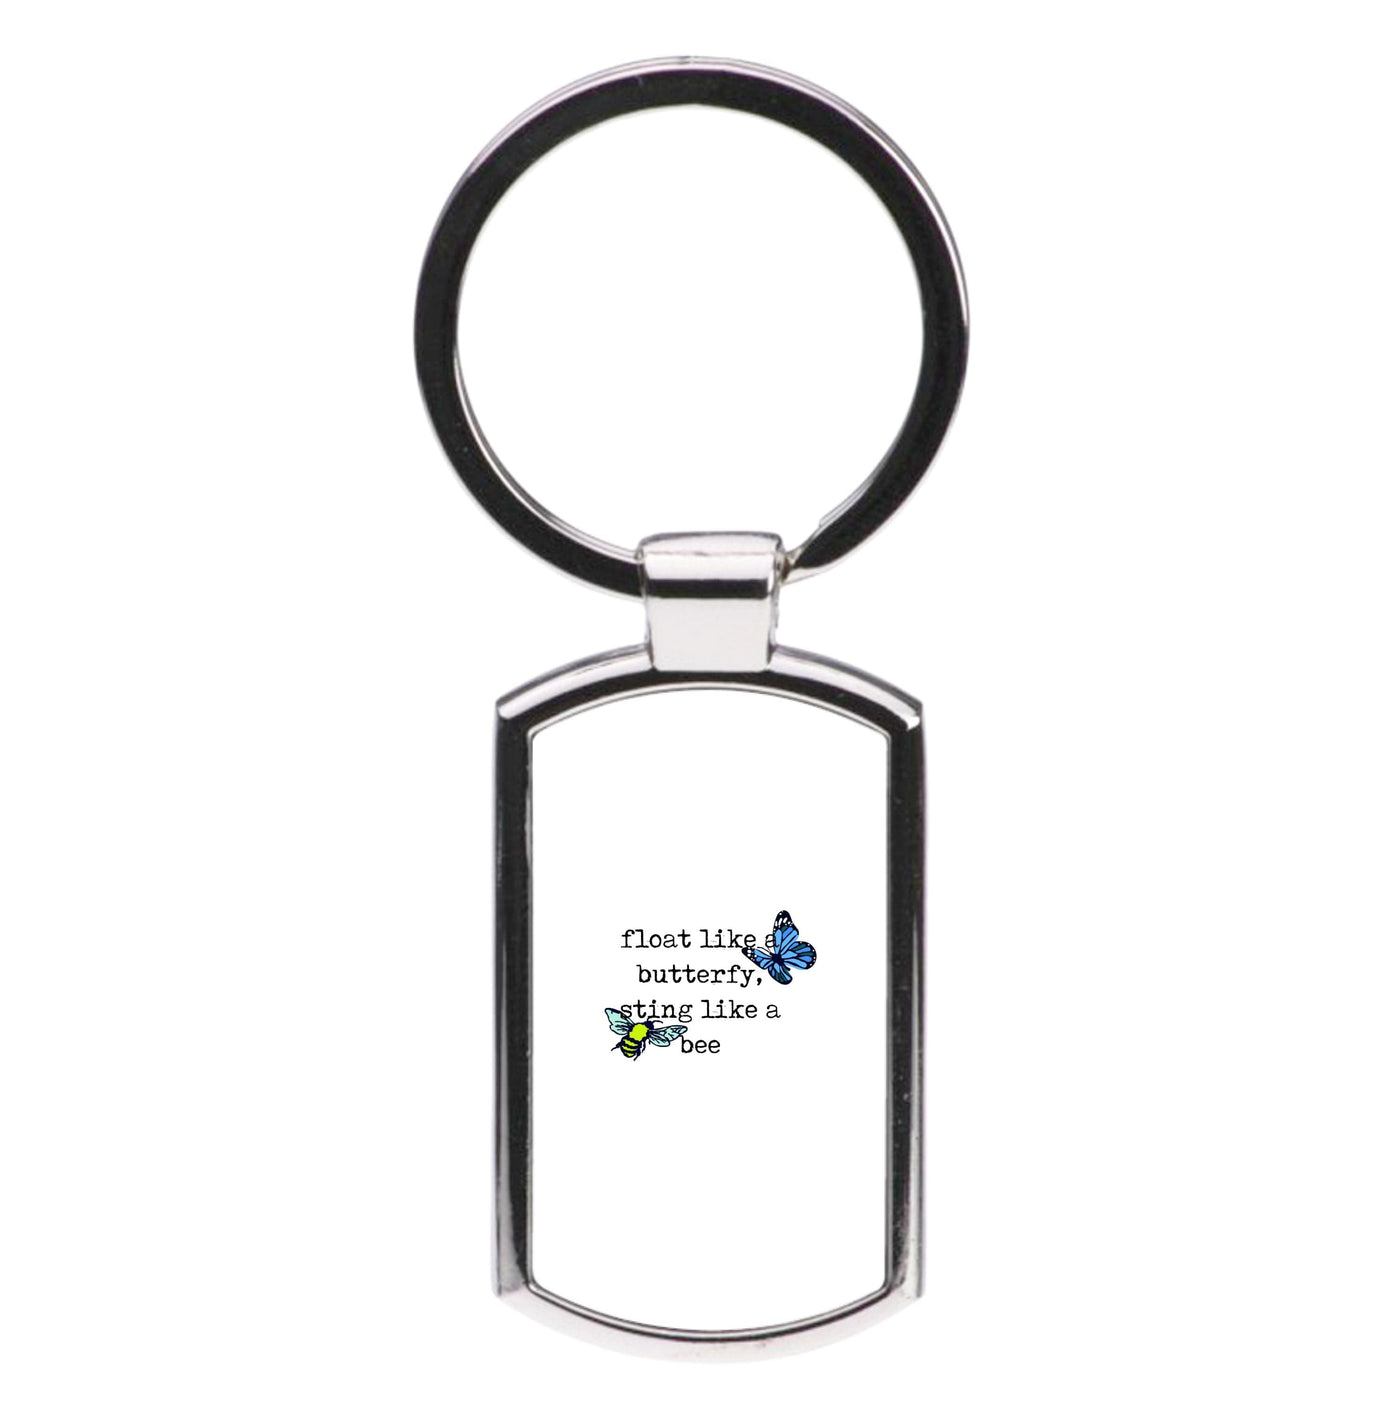 Float like a butterfly, sting like a bee - Boxing Luxury Keyring